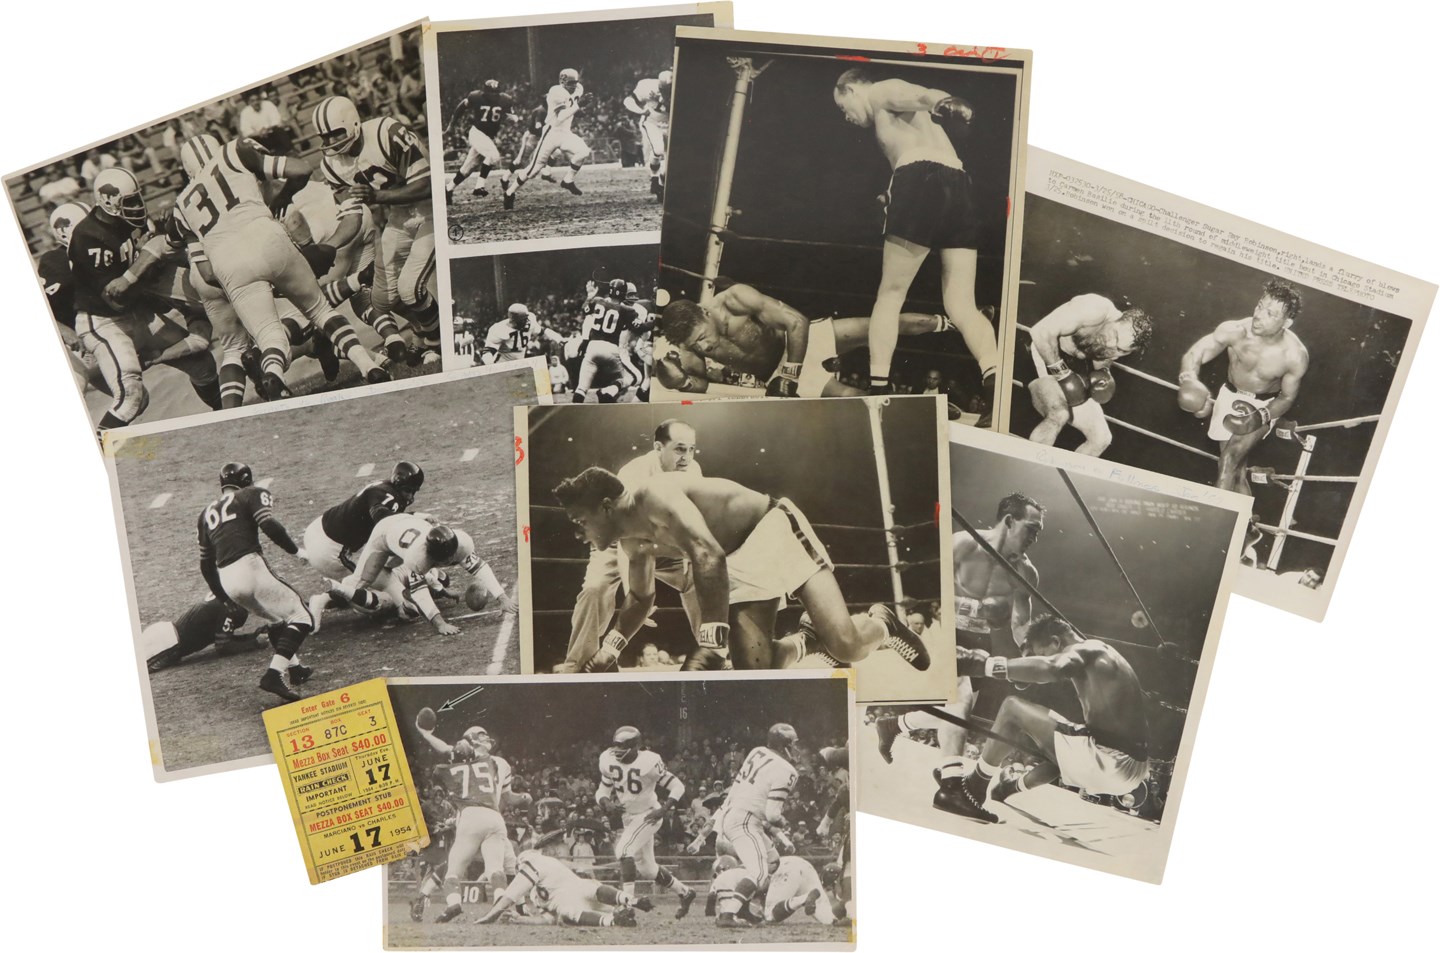 Tickets, Publications & Pins - Vintage Multi-Sport Photograph & Ticket Stub Collection w/Big Names (34)